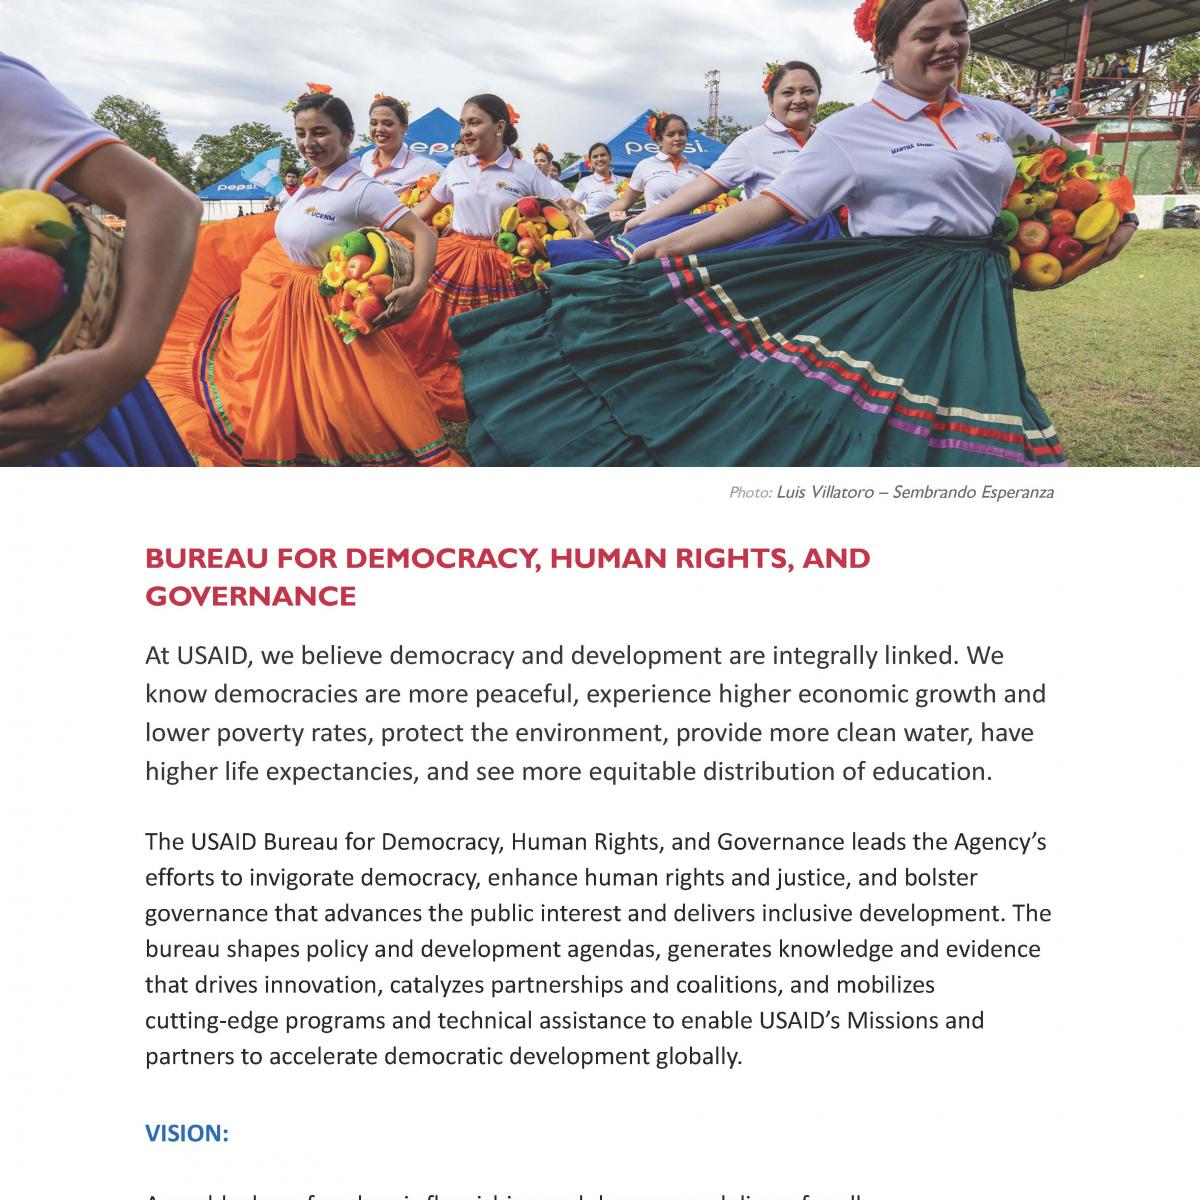 Bureau for Democracy, Human Rights, and Governance Factsheet